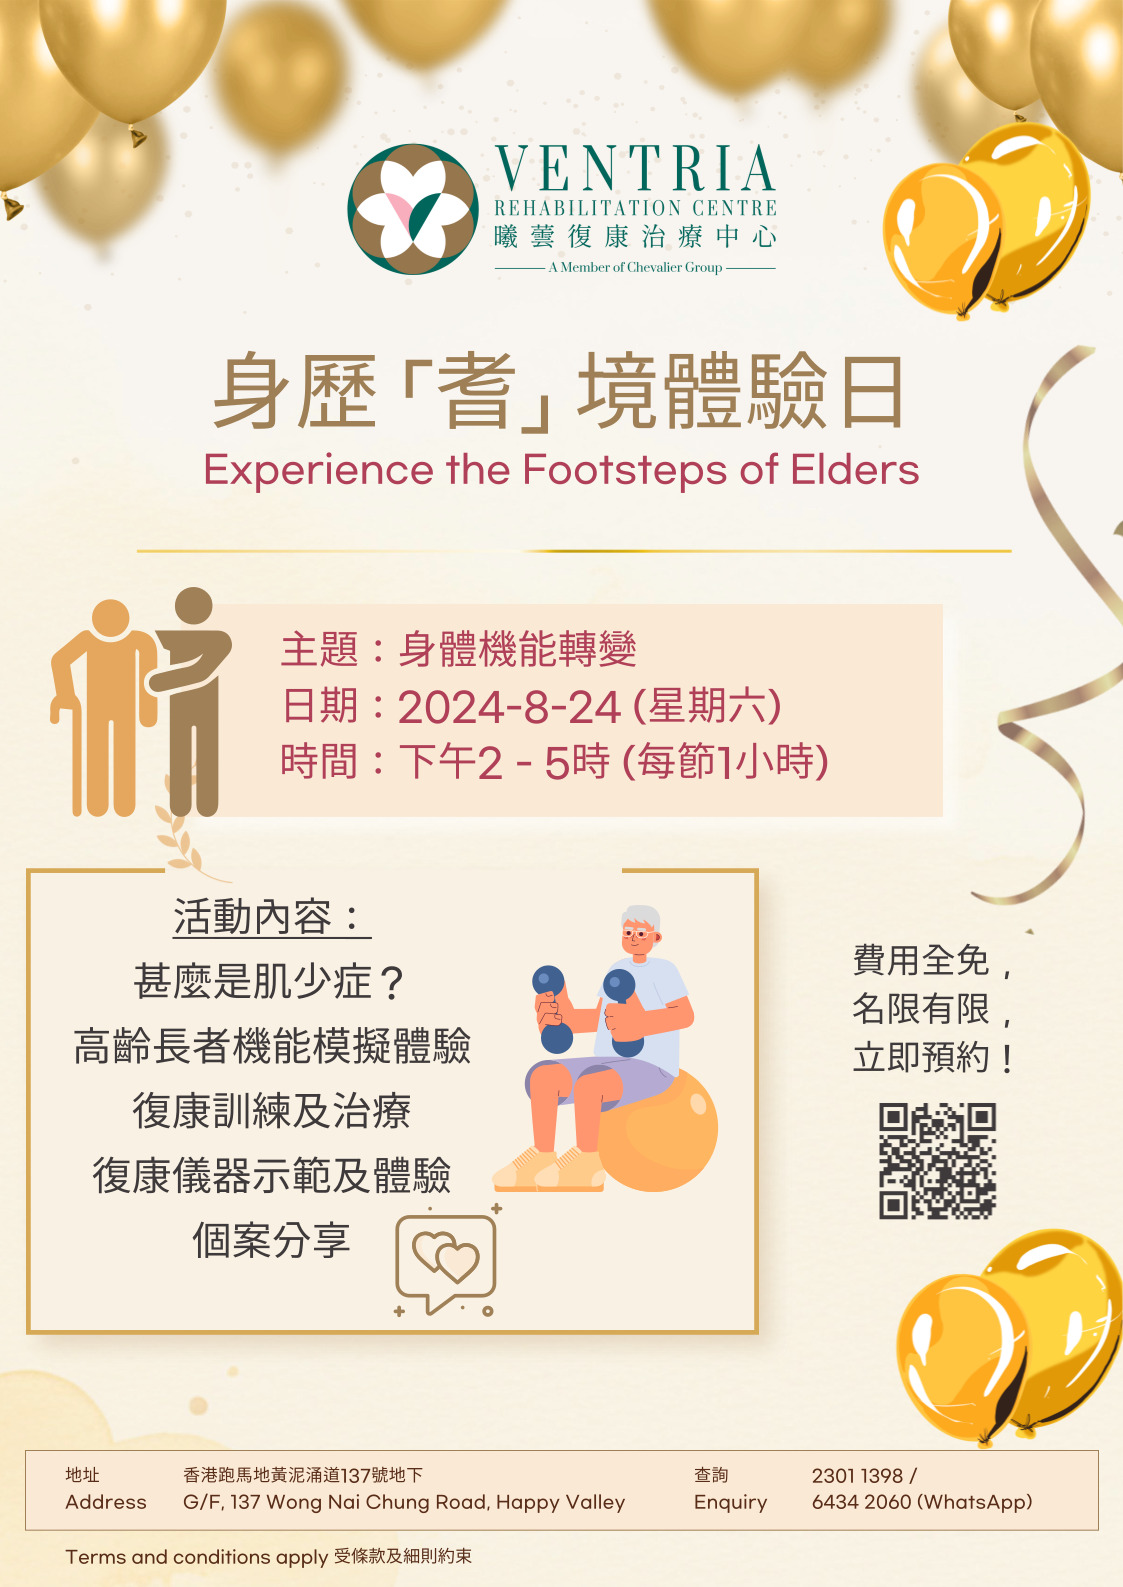 Experience the Footsteps of Elders - Physical Aging Process